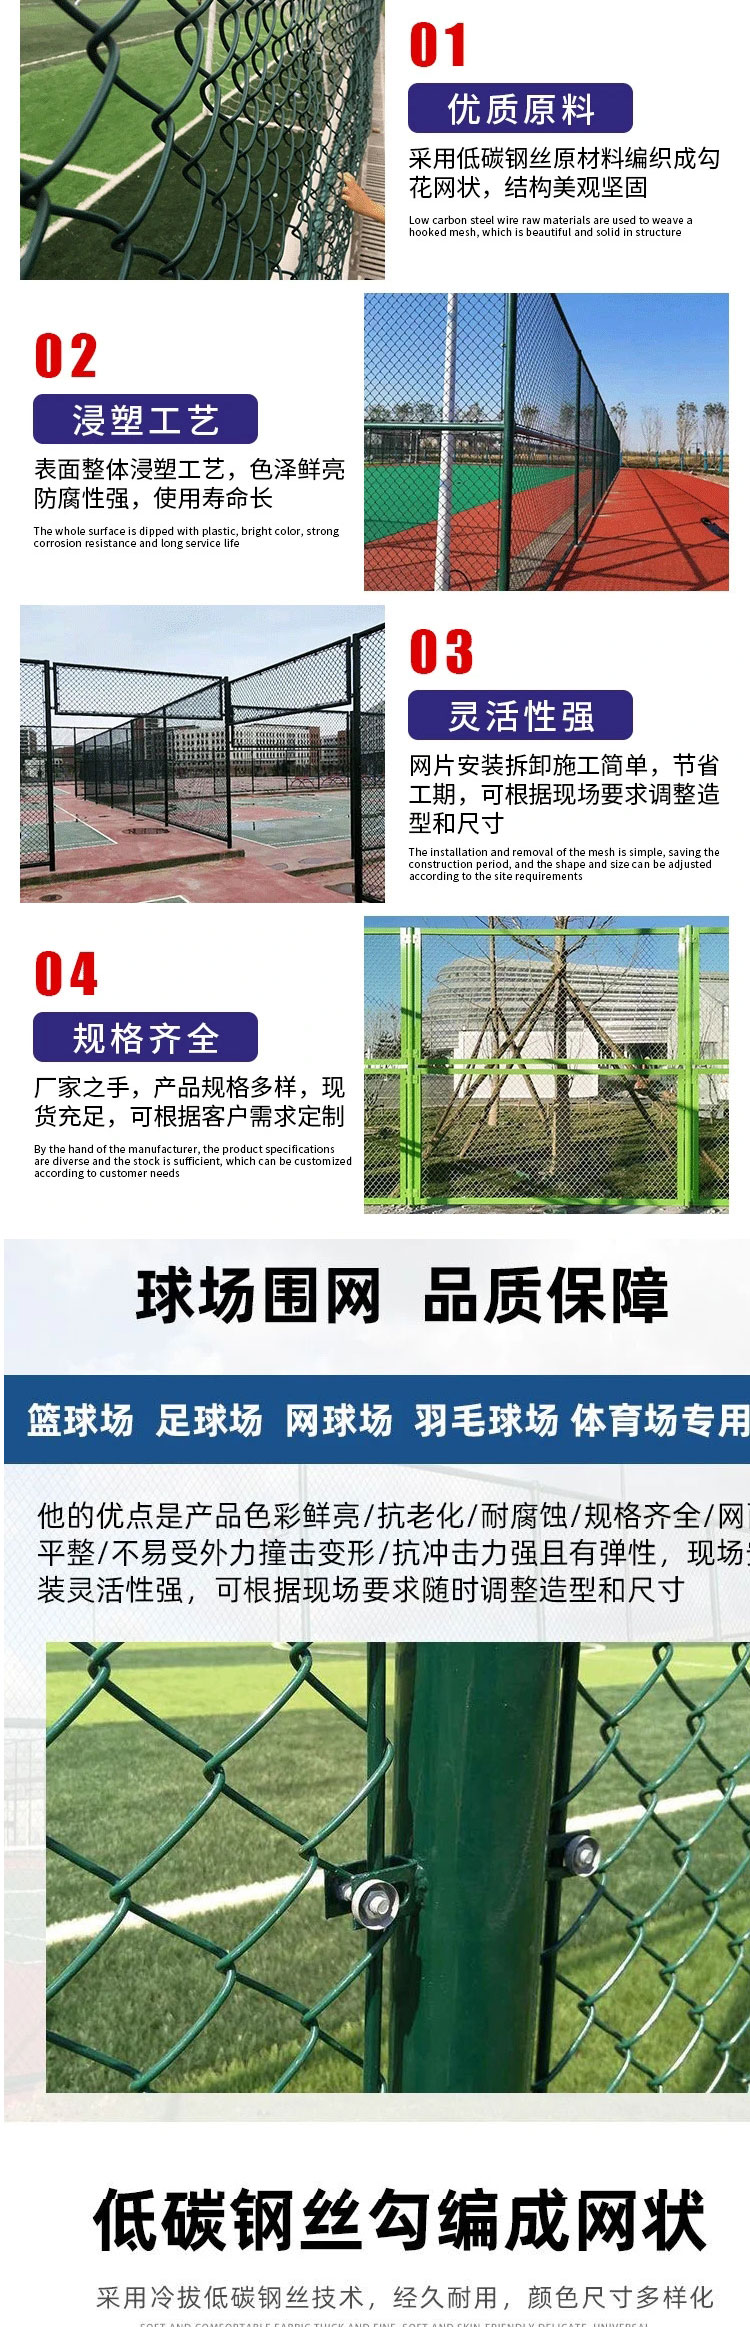 Stadium Fence Net, Stadium Wire Mesh Fence, Hook Mesh, Galvanized Football and Basketball Court Fence, Collision Prevention and Isolation